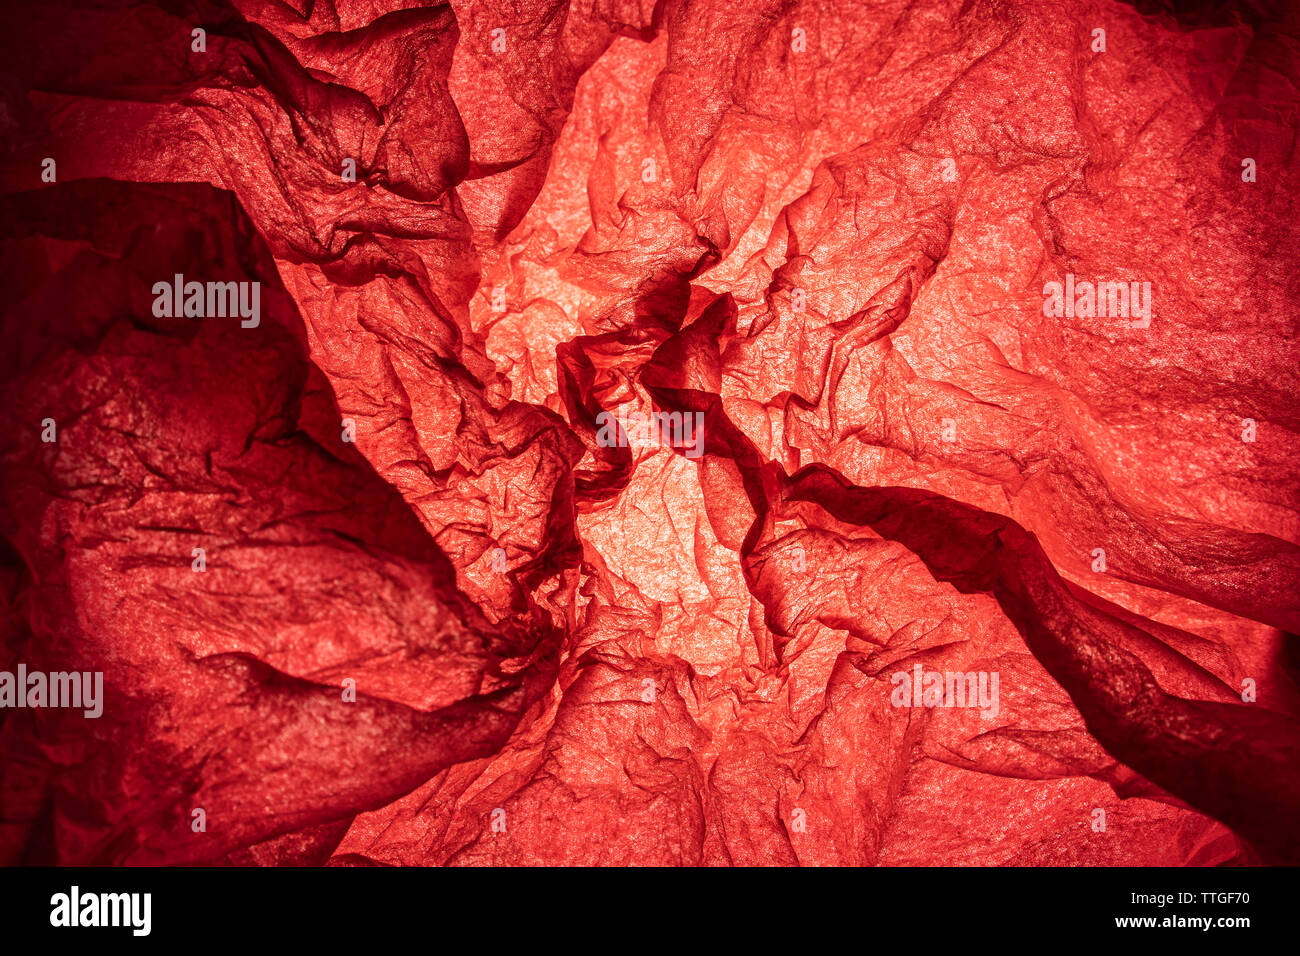 Simulation, with red tissue paper, of blood vessels on a medical image Stock Photo